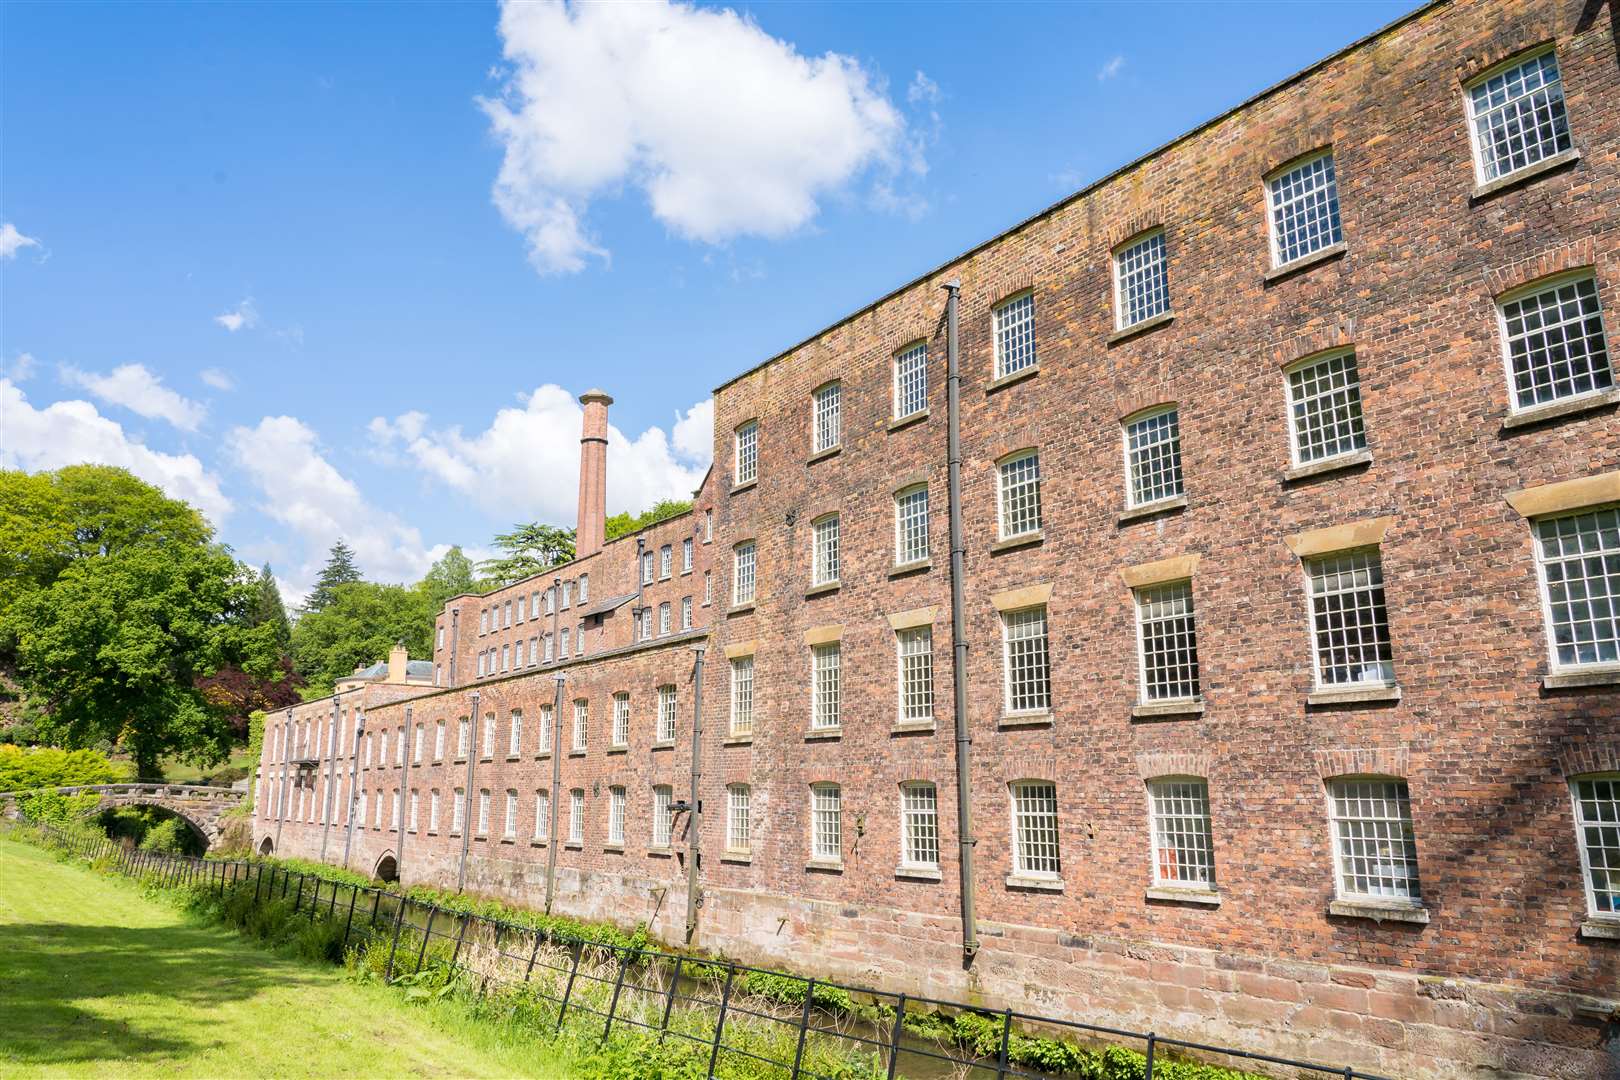 Quarry Bank Mill in Styal, Cheshire, England, is one of the best preserved textile mills of the Industrial Revolution and is now a museum of the cotton industry.